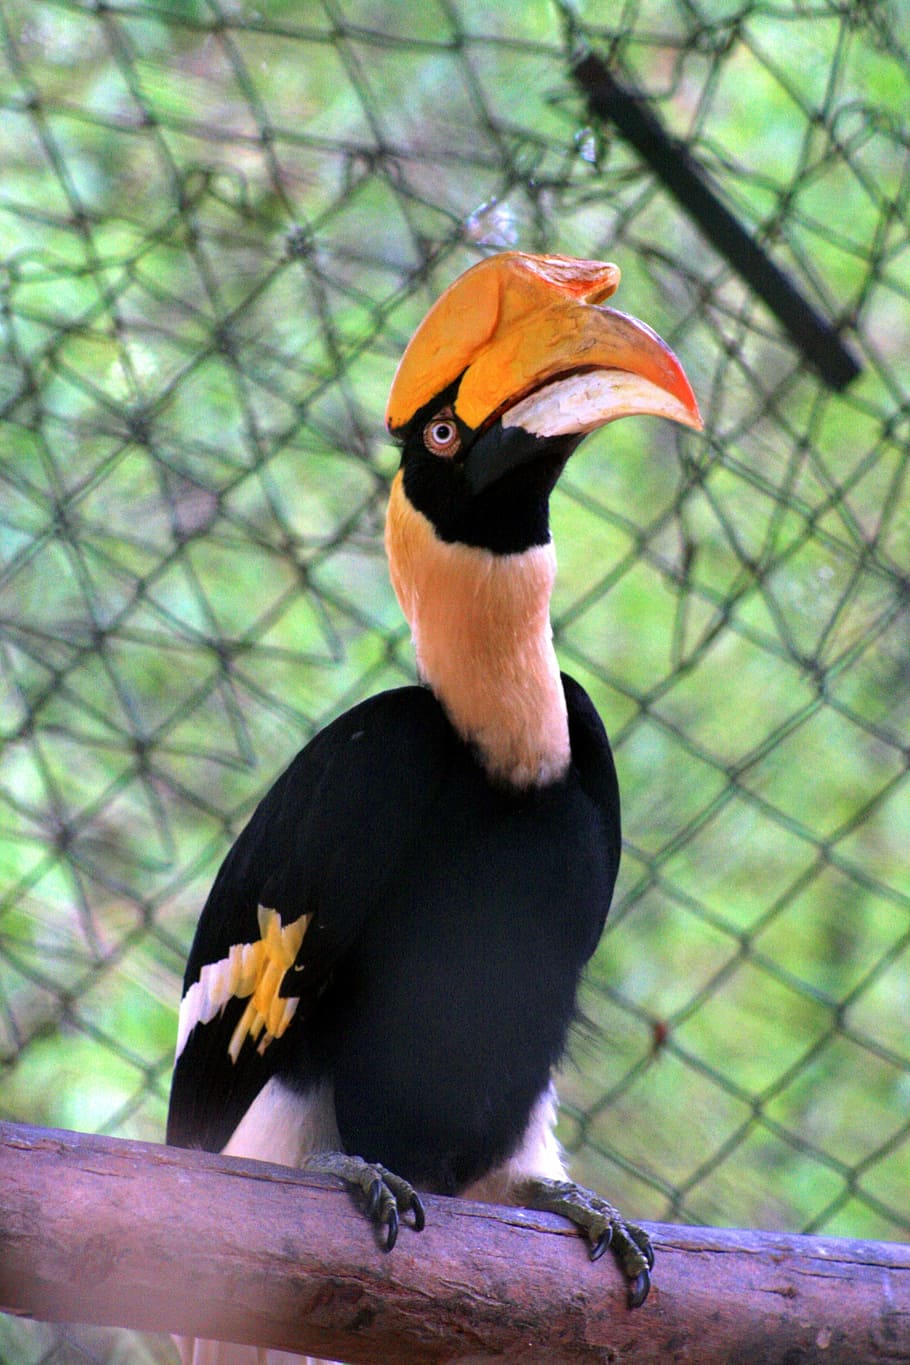 double hornbill, parrot, bird, exotic, bannerghatta, national park, caught, cage, nature conservation, animal themes